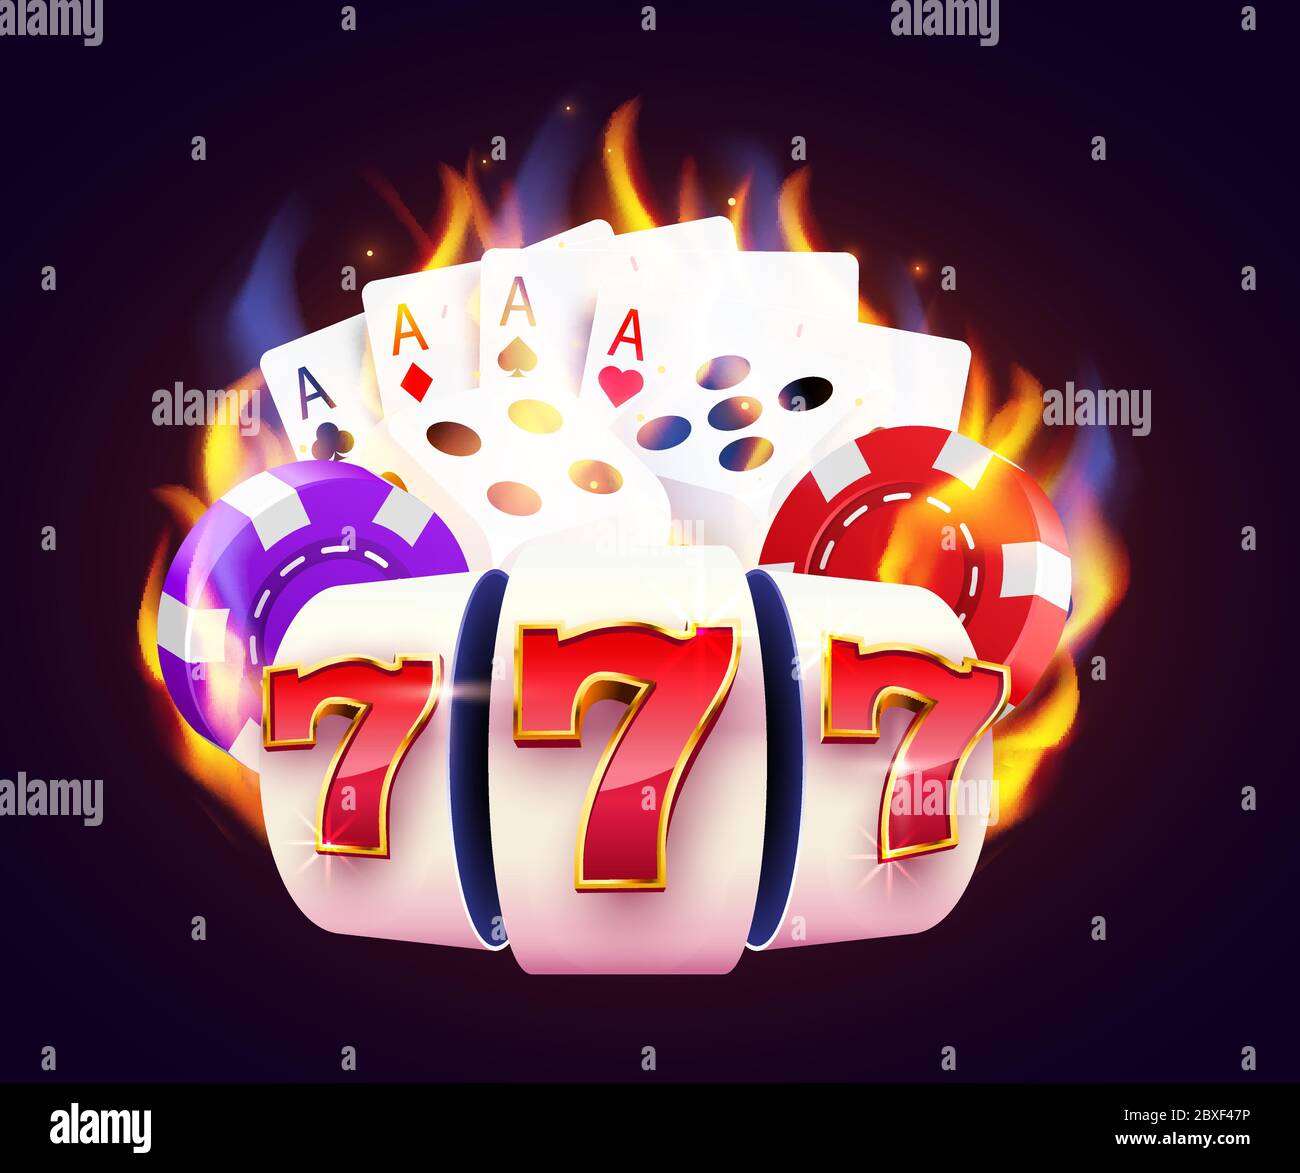 Burning slot machine, dices, poker cards wins wins the jackpot. Fire casino concept. Hot 777. Vector illustration Stock Vector